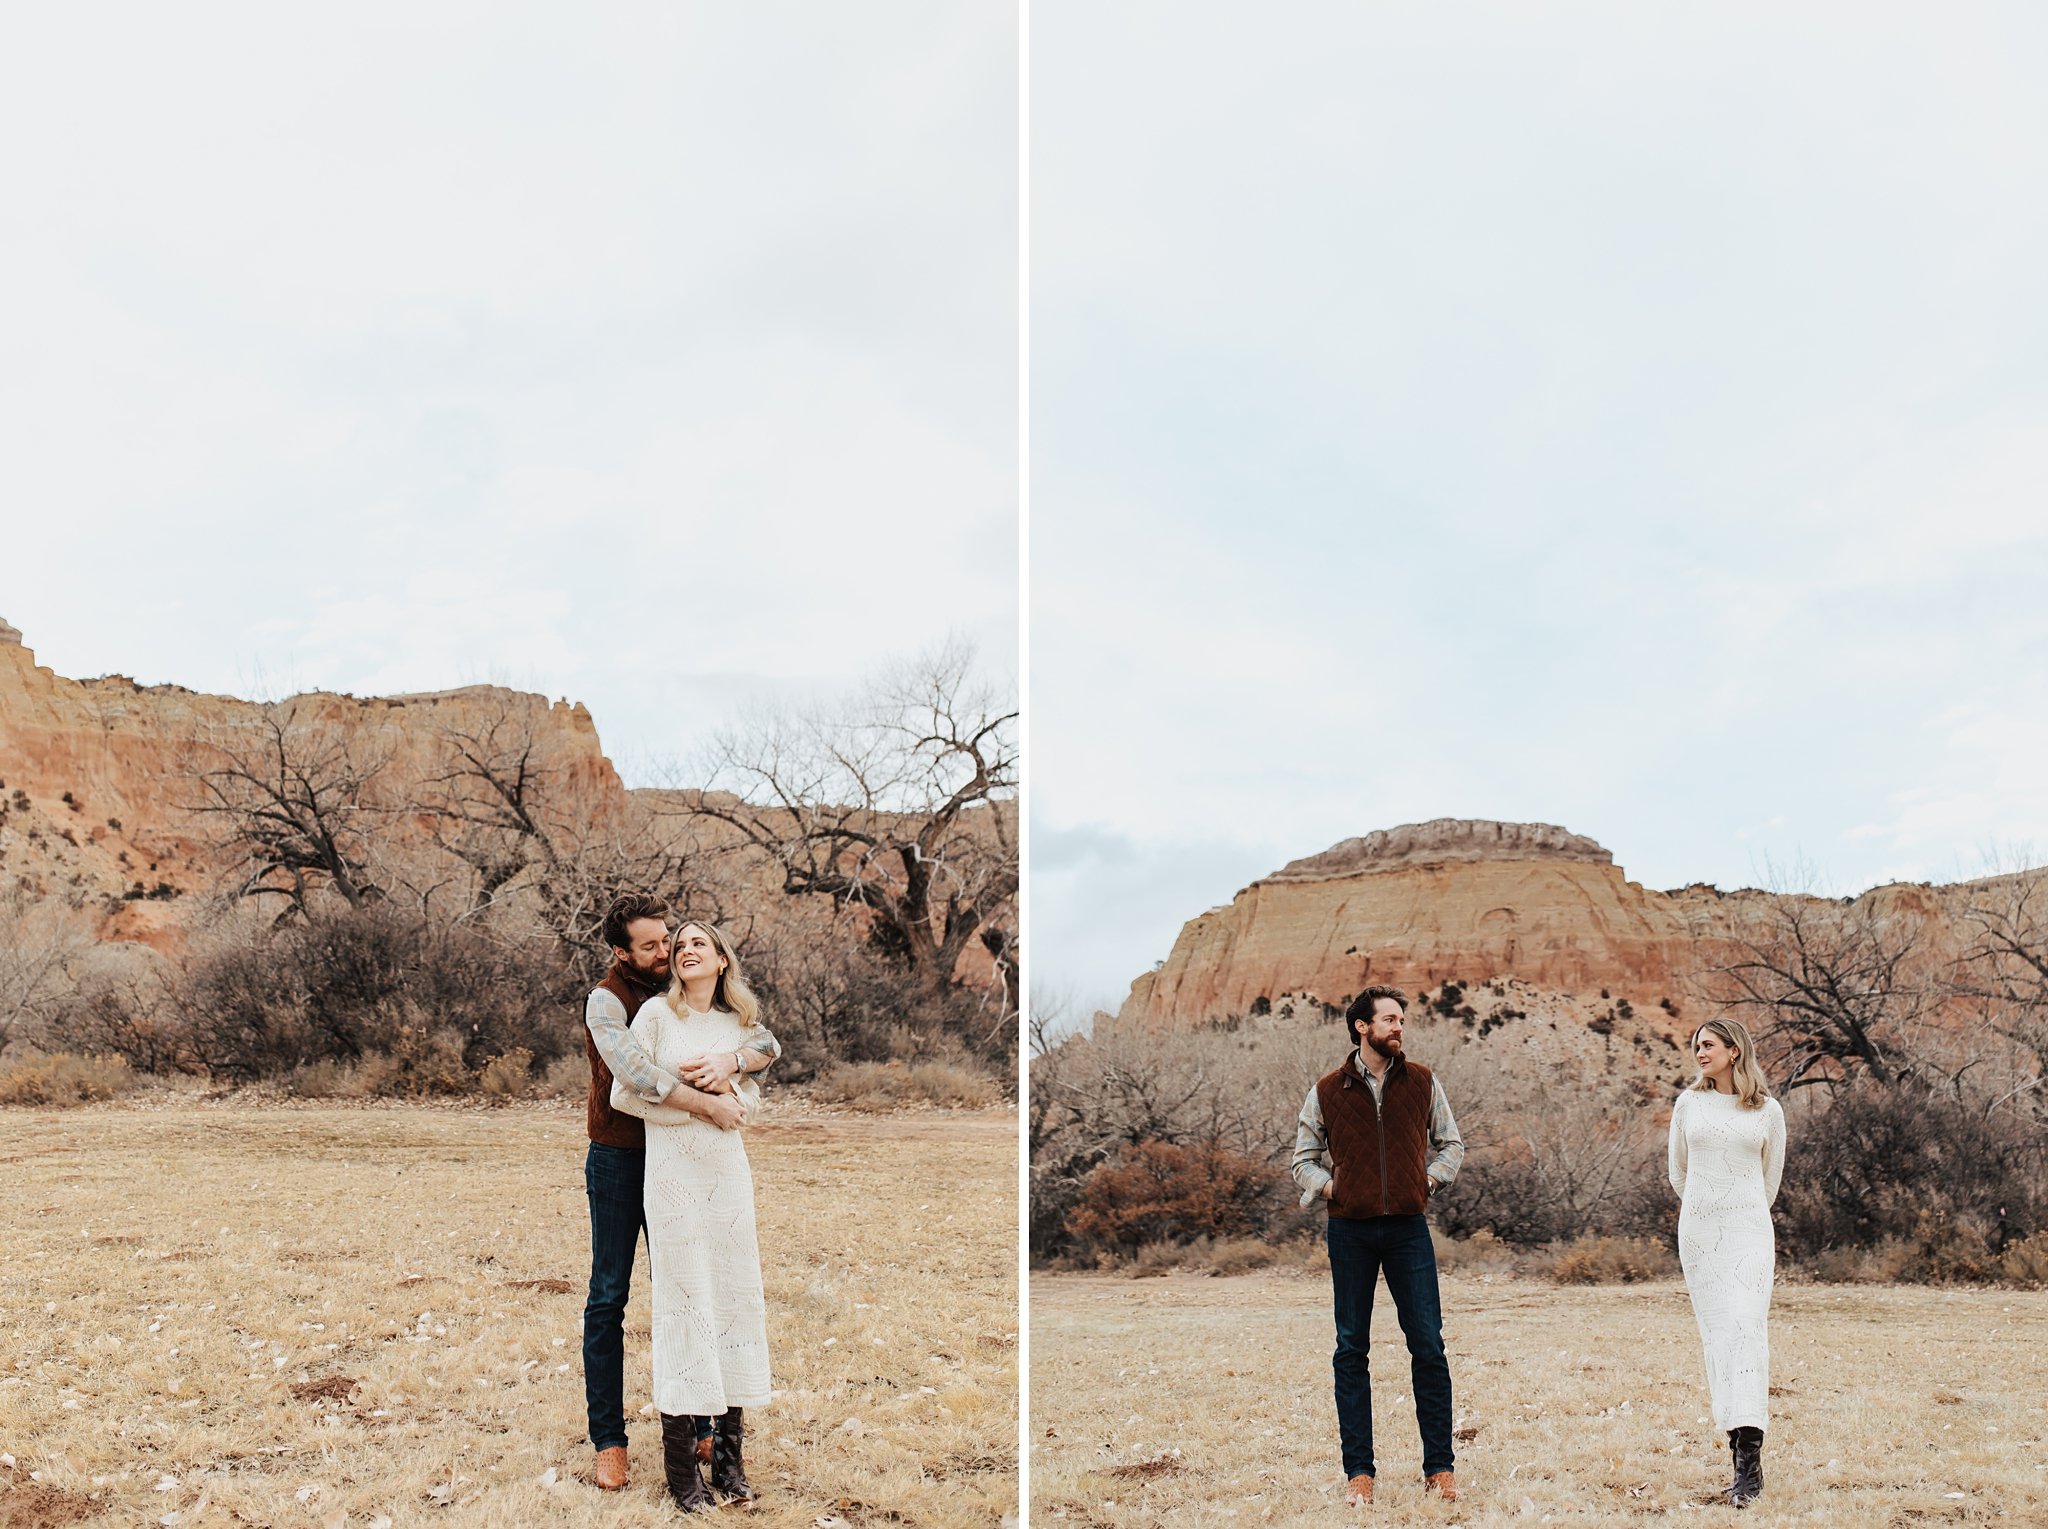 Alicia+lucia+photography+-+albuquerque+wedding+photographer+-+santa+fe+wedding+photography+-+new+mexico+wedding+photographer+-+new+mexico+wedding+-+southwest+engagement+-+ghost+ranch+engagement+-+ghost+ranch+wedding_0003.jpg